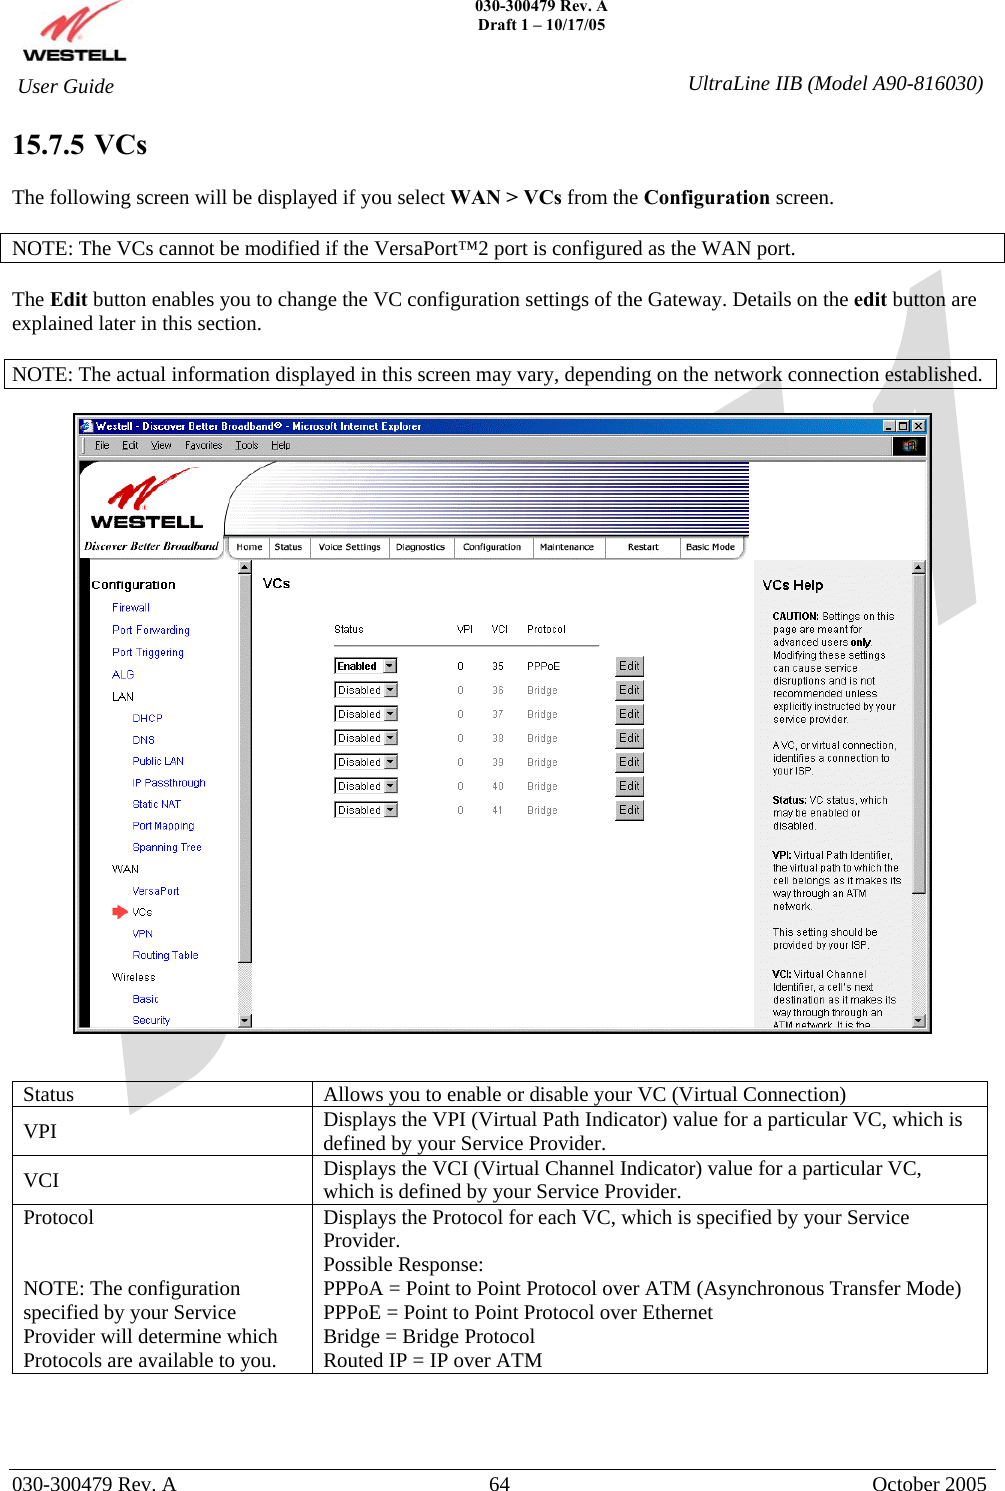    030-300479 Rev. A Draft 1 – 10/17/05   030-300479 Rev. A  64  October 2005  User Guide  UltraLine IIB (Model A90-816030)15.7.5   VCs  The following screen will be displayed if you select WAN &gt; VCs from the Configuration screen.  NOTE: The VCs cannot be modified if the VersaPort™2 port is configured as the WAN port.  The Edit button enables you to change the VC configuration settings of the Gateway. Details on the edit button are explained later in this section.  NOTE: The actual information displayed in this screen may vary, depending on the network connection established.     Status  Allows you to enable or disable your VC (Virtual Connection) VPI  Displays the VPI (Virtual Path Indicator) value for a particular VC, which is defined by your Service Provider. VCI  Displays the VCI (Virtual Channel Indicator) value for a particular VC, which is defined by your Service Provider. Protocol   NOTE: The configuration specified by your Service Provider will determine which Protocols are available to you. Displays the Protocol for each VC, which is specified by your Service Provider. Possible Response: PPPoA = Point to Point Protocol over ATM (Asynchronous Transfer Mode) PPPoE = Point to Point Protocol over Ethernet Bridge = Bridge Protocol Routed IP = IP over ATM    